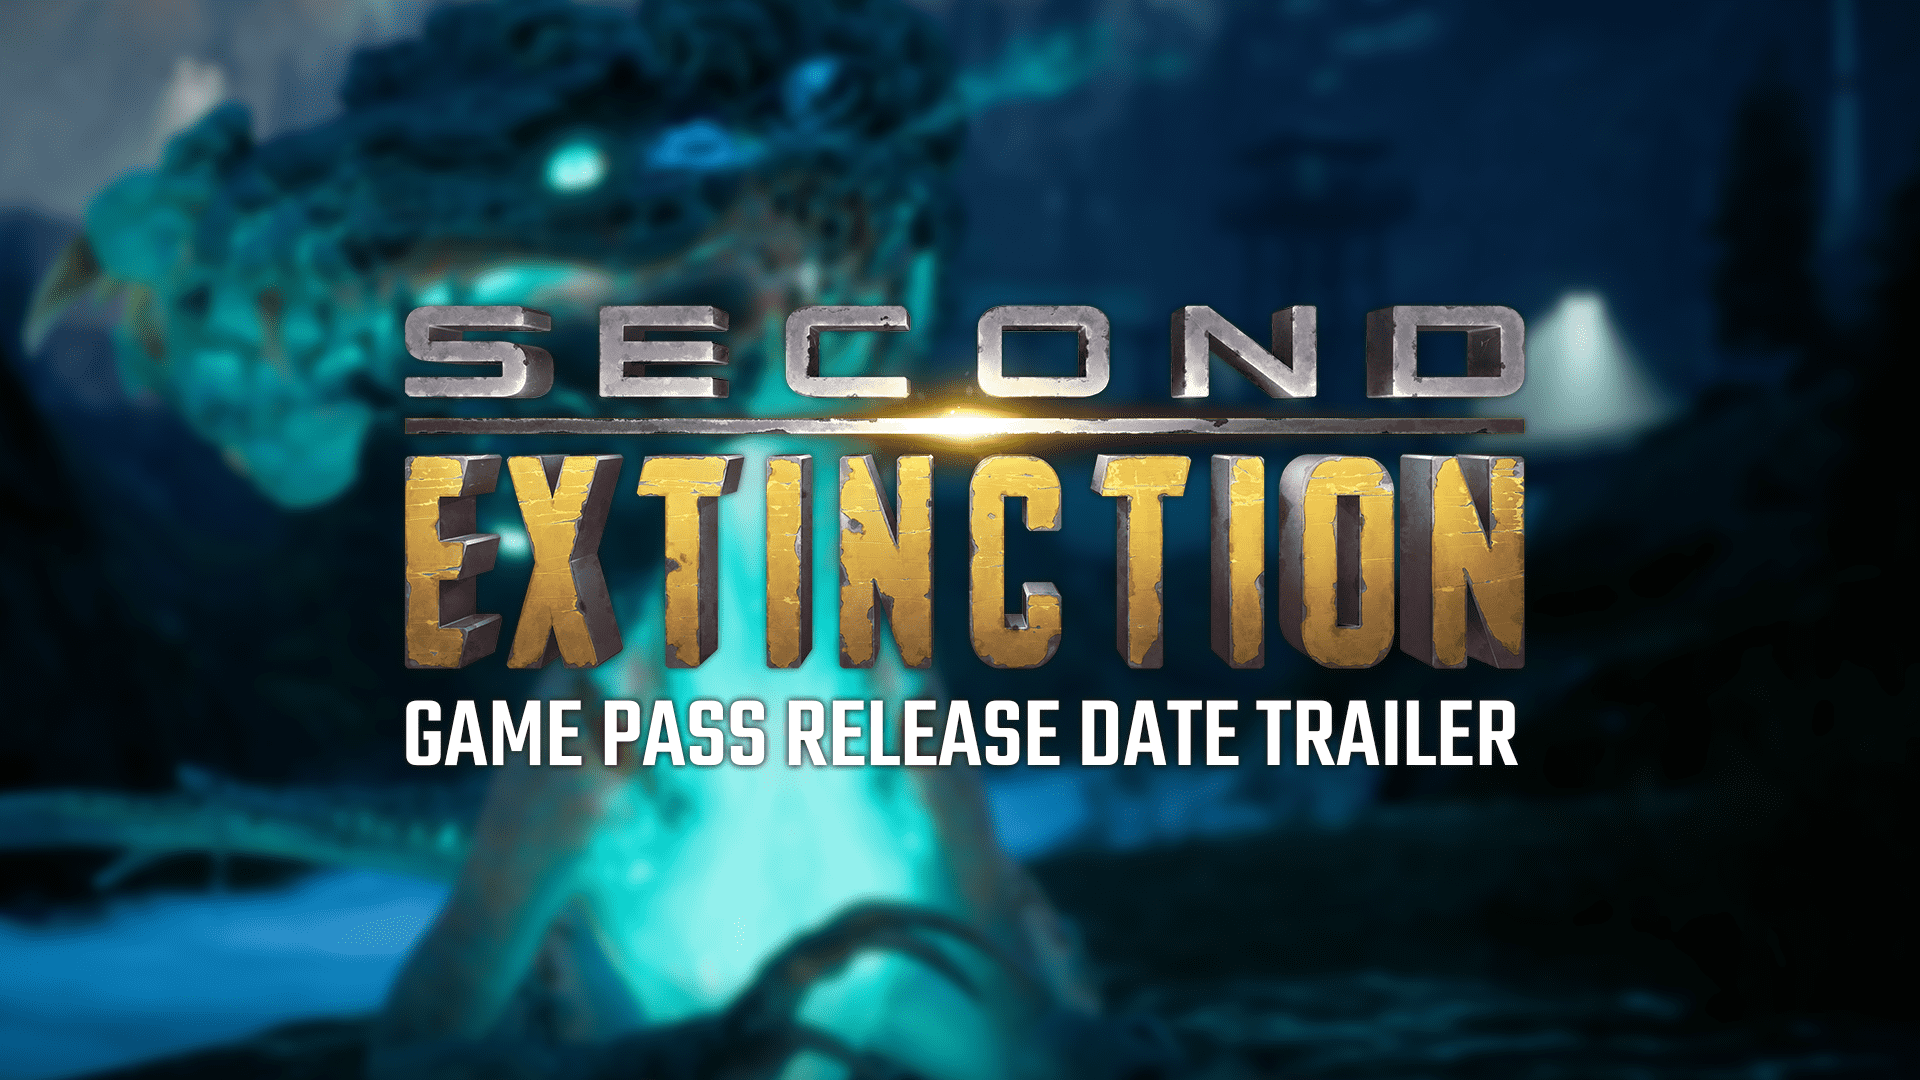 Game Pass Release Date Trailer